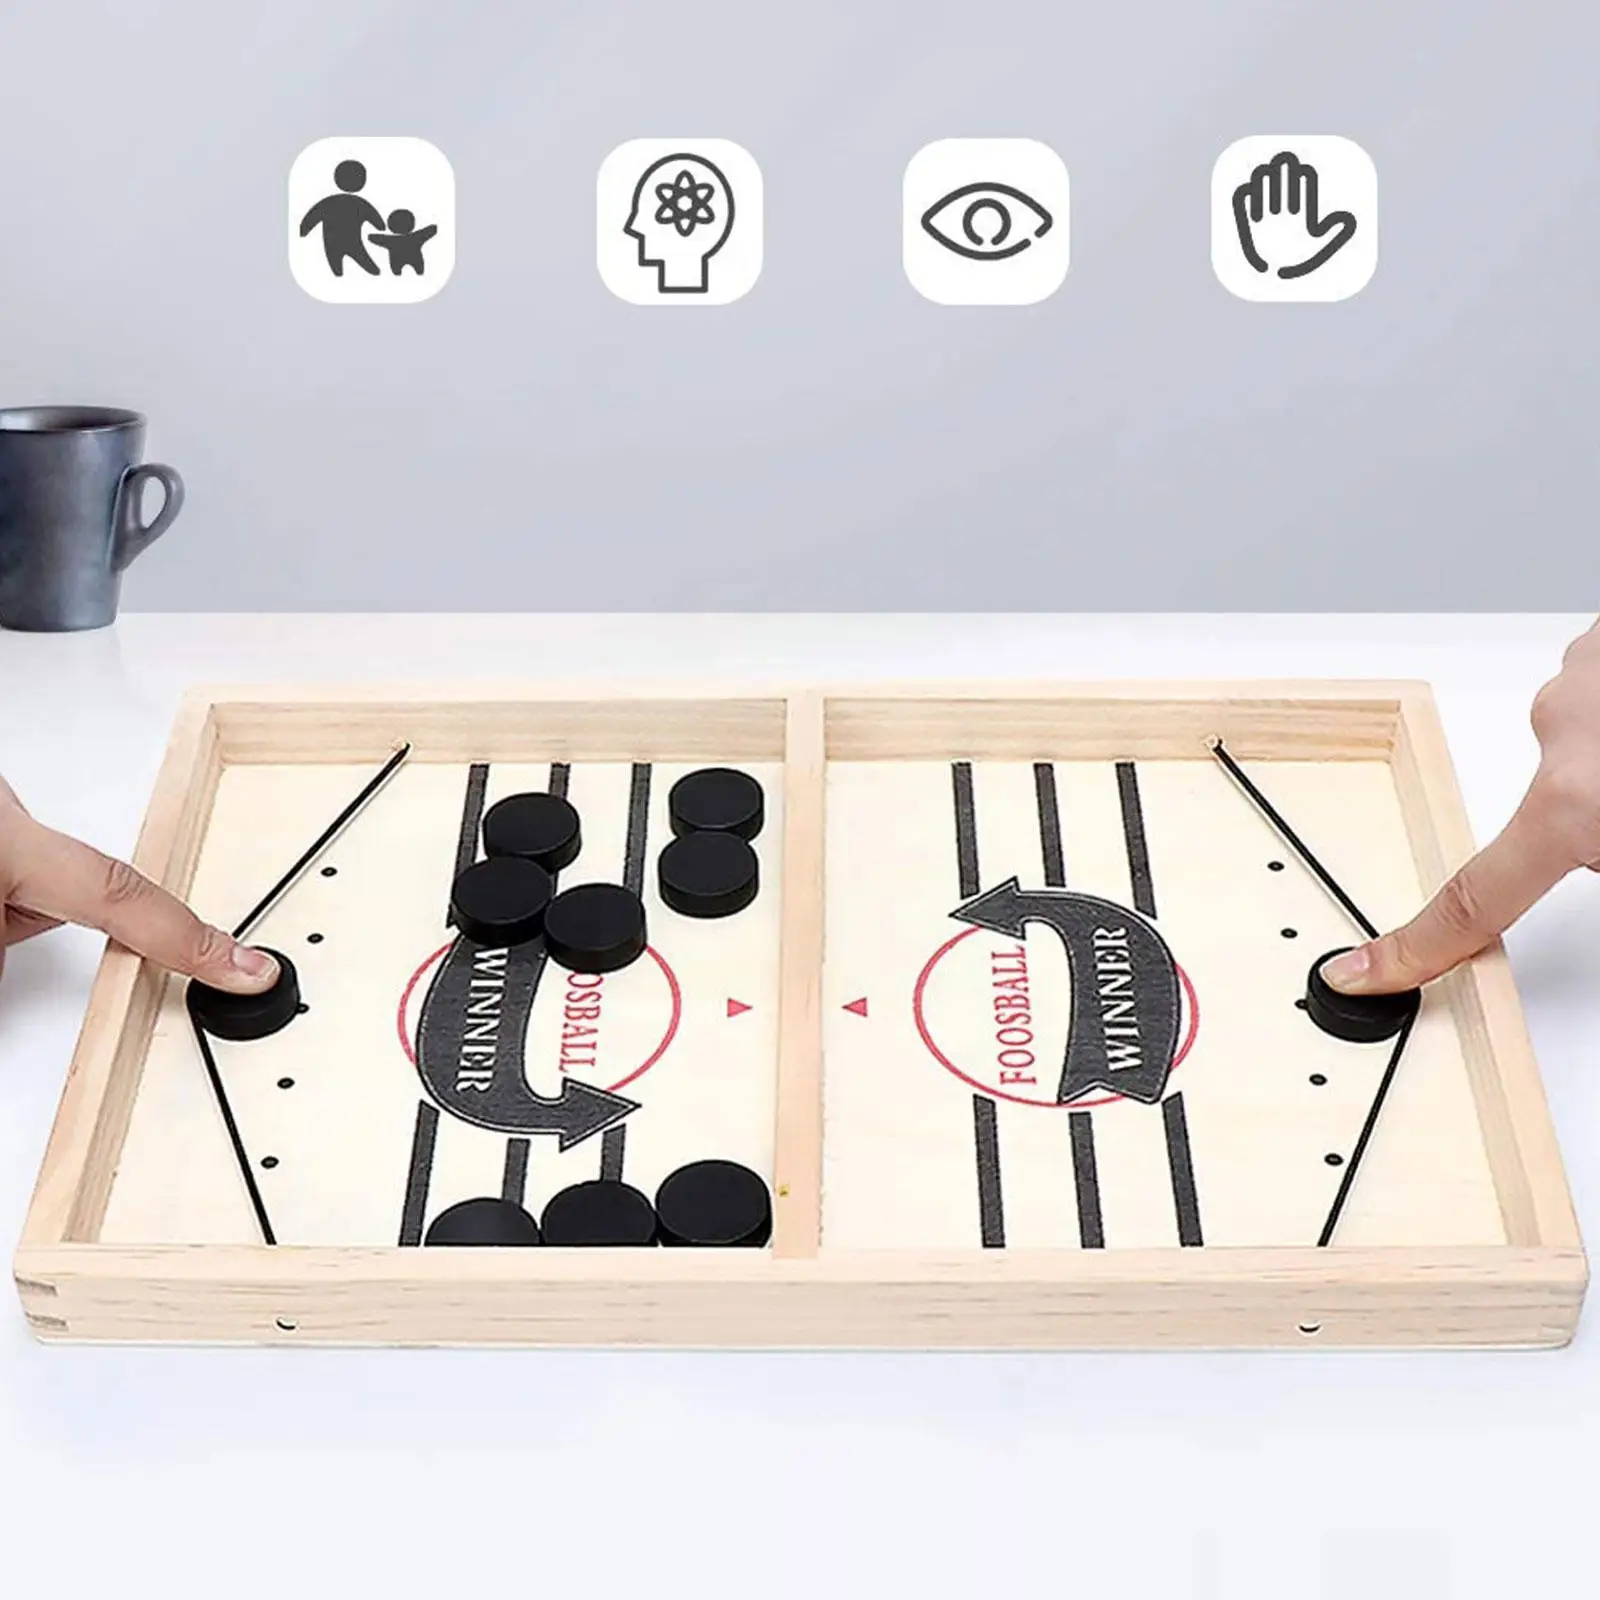 Foosball Winner Games Table Hockey Game Catapult Chess Fast Sling Puck Board Game Toys For Children Parent-child Interactiv B9k2